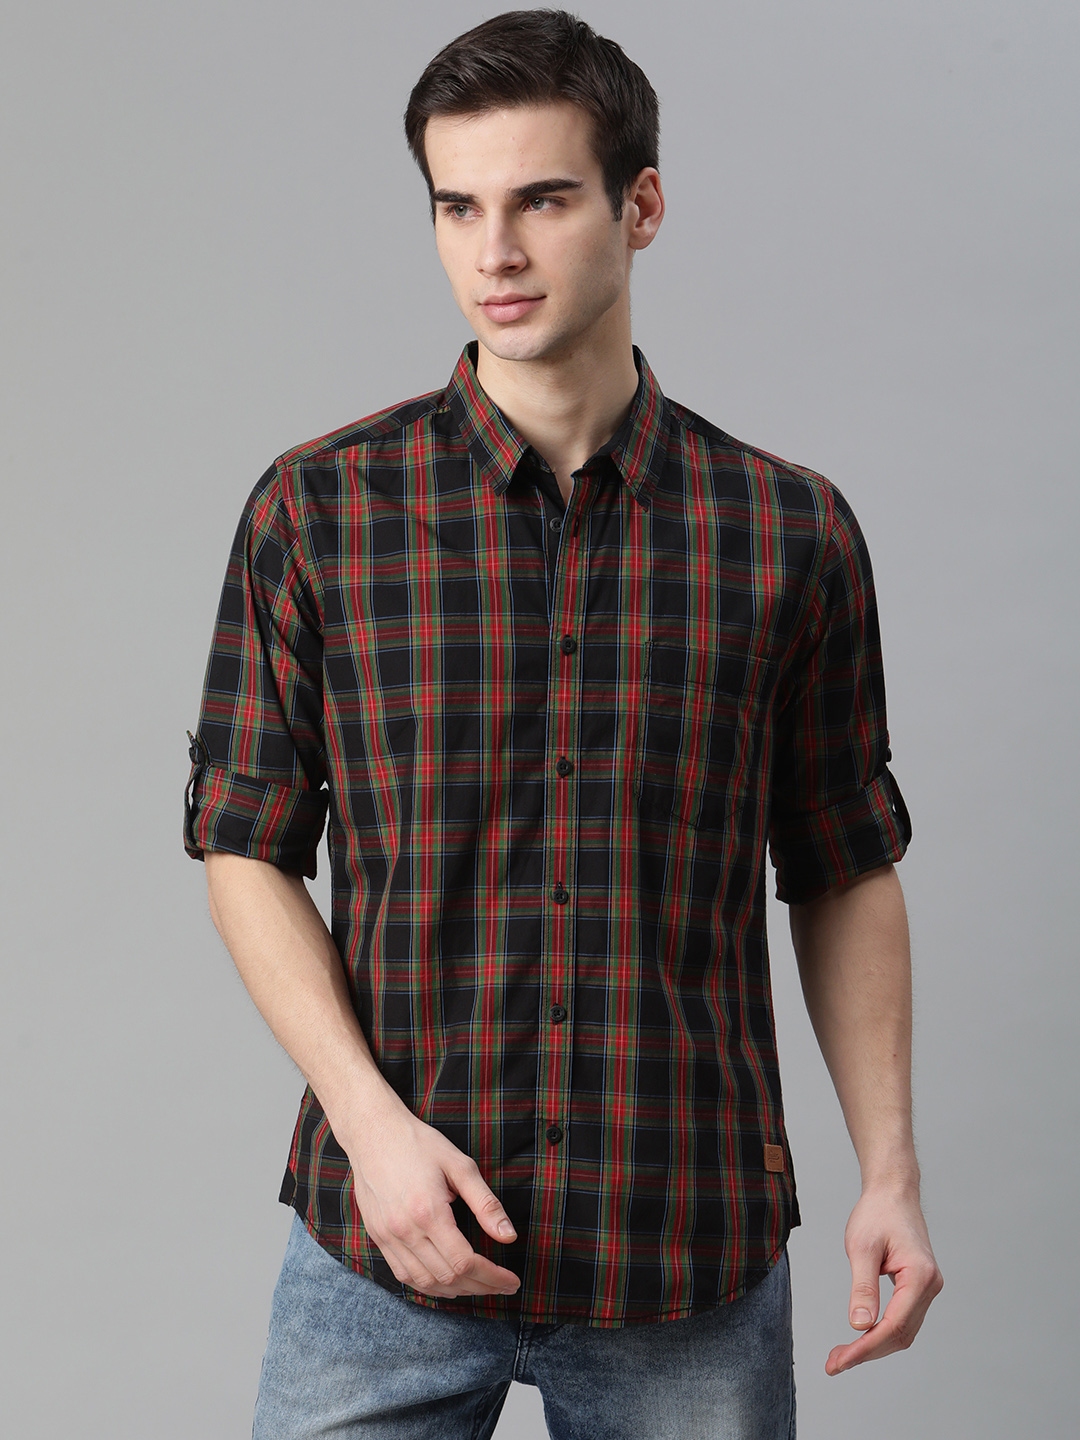 Buy Roadster Men Black & Red Tartan Checked Twill Pure Cotton Casual ...